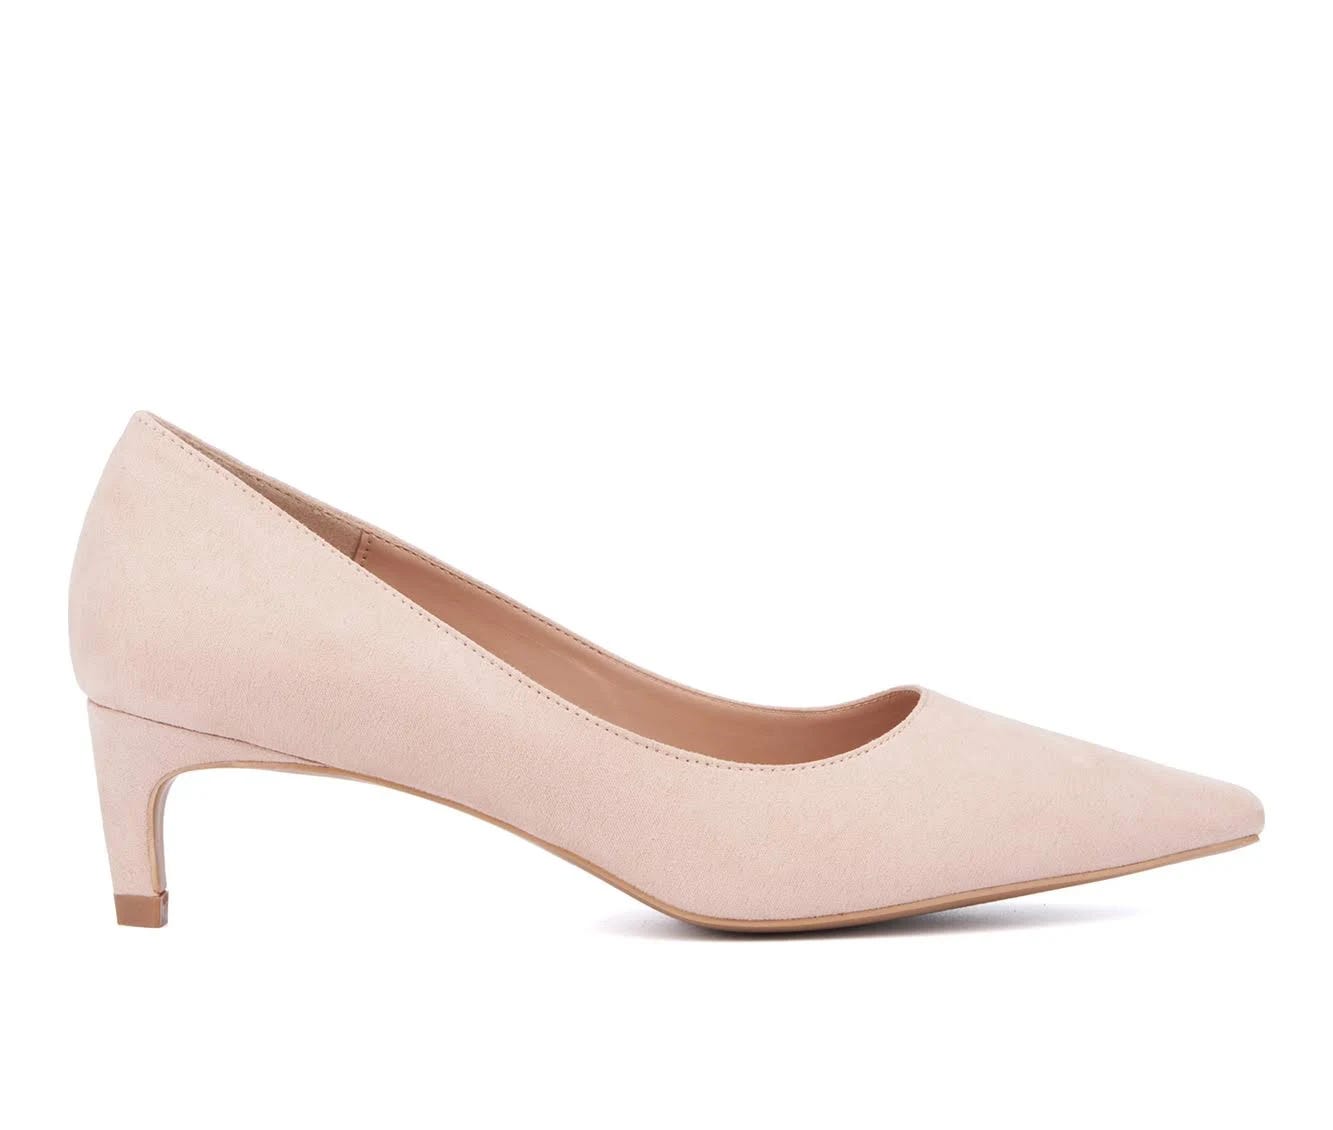 Stylish Nude Kitten Heel Pumps for Everyday Chic | Image